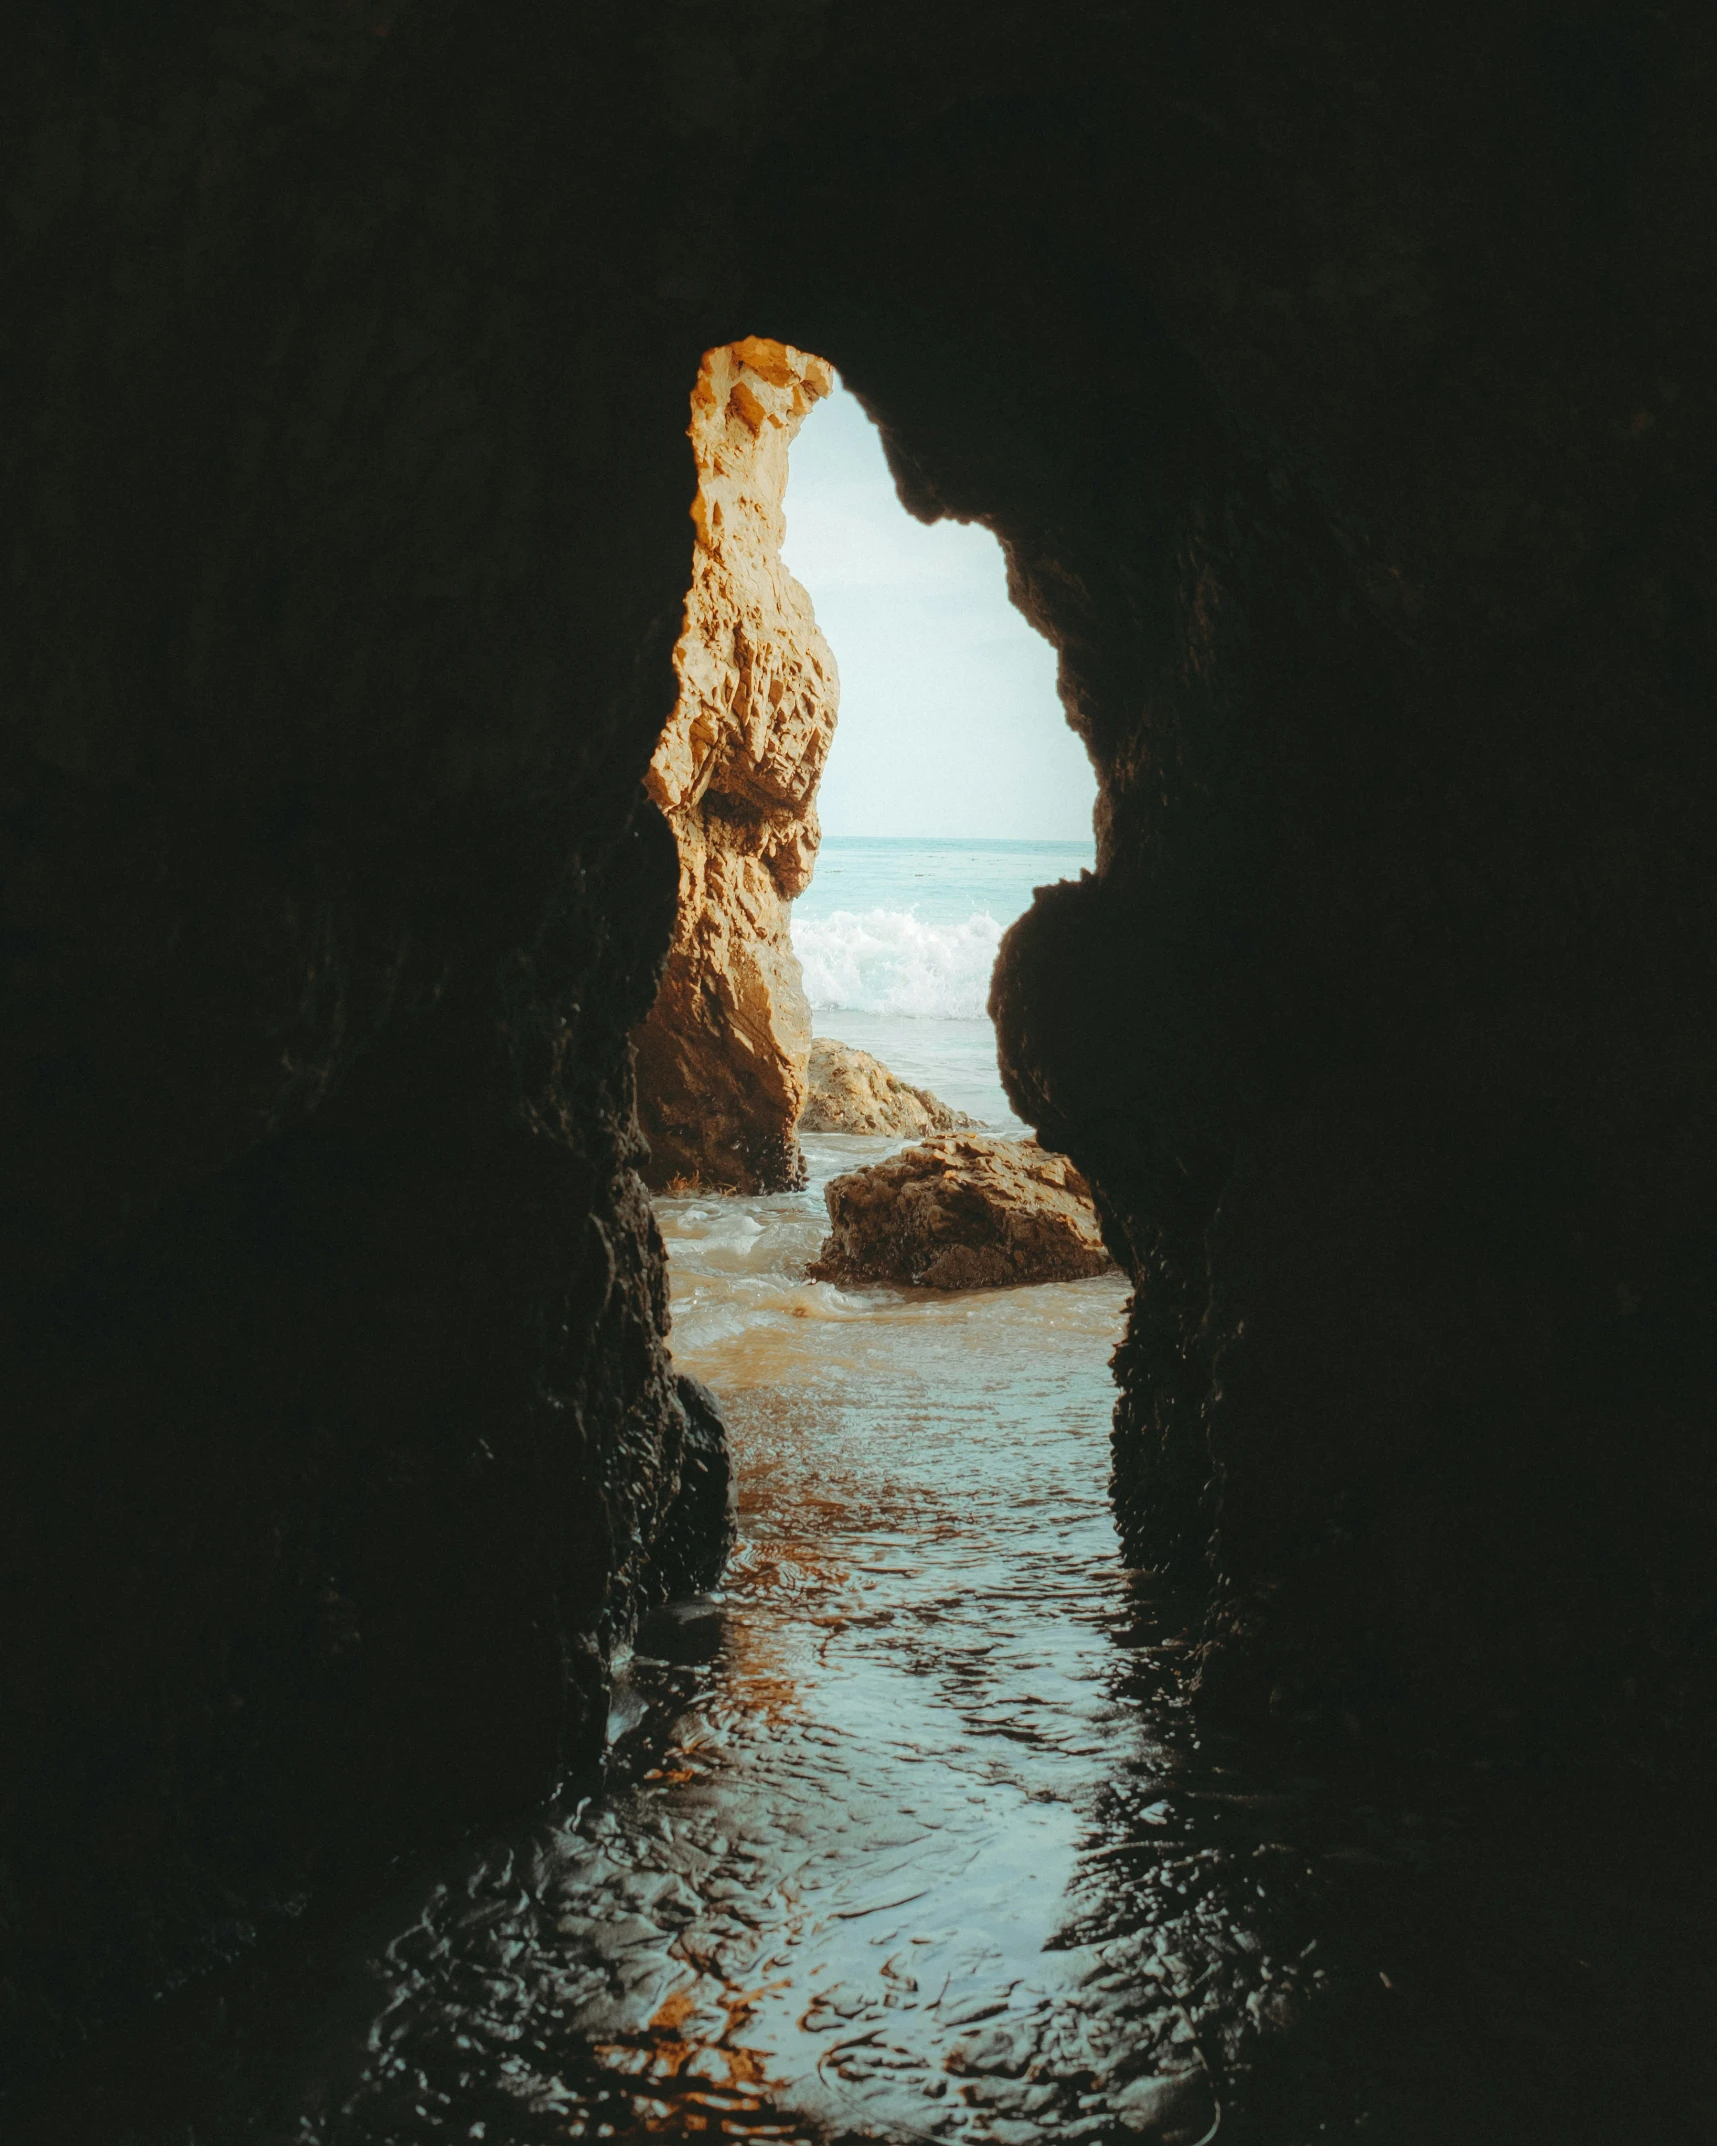 a view from inside of a rock cave on the beach